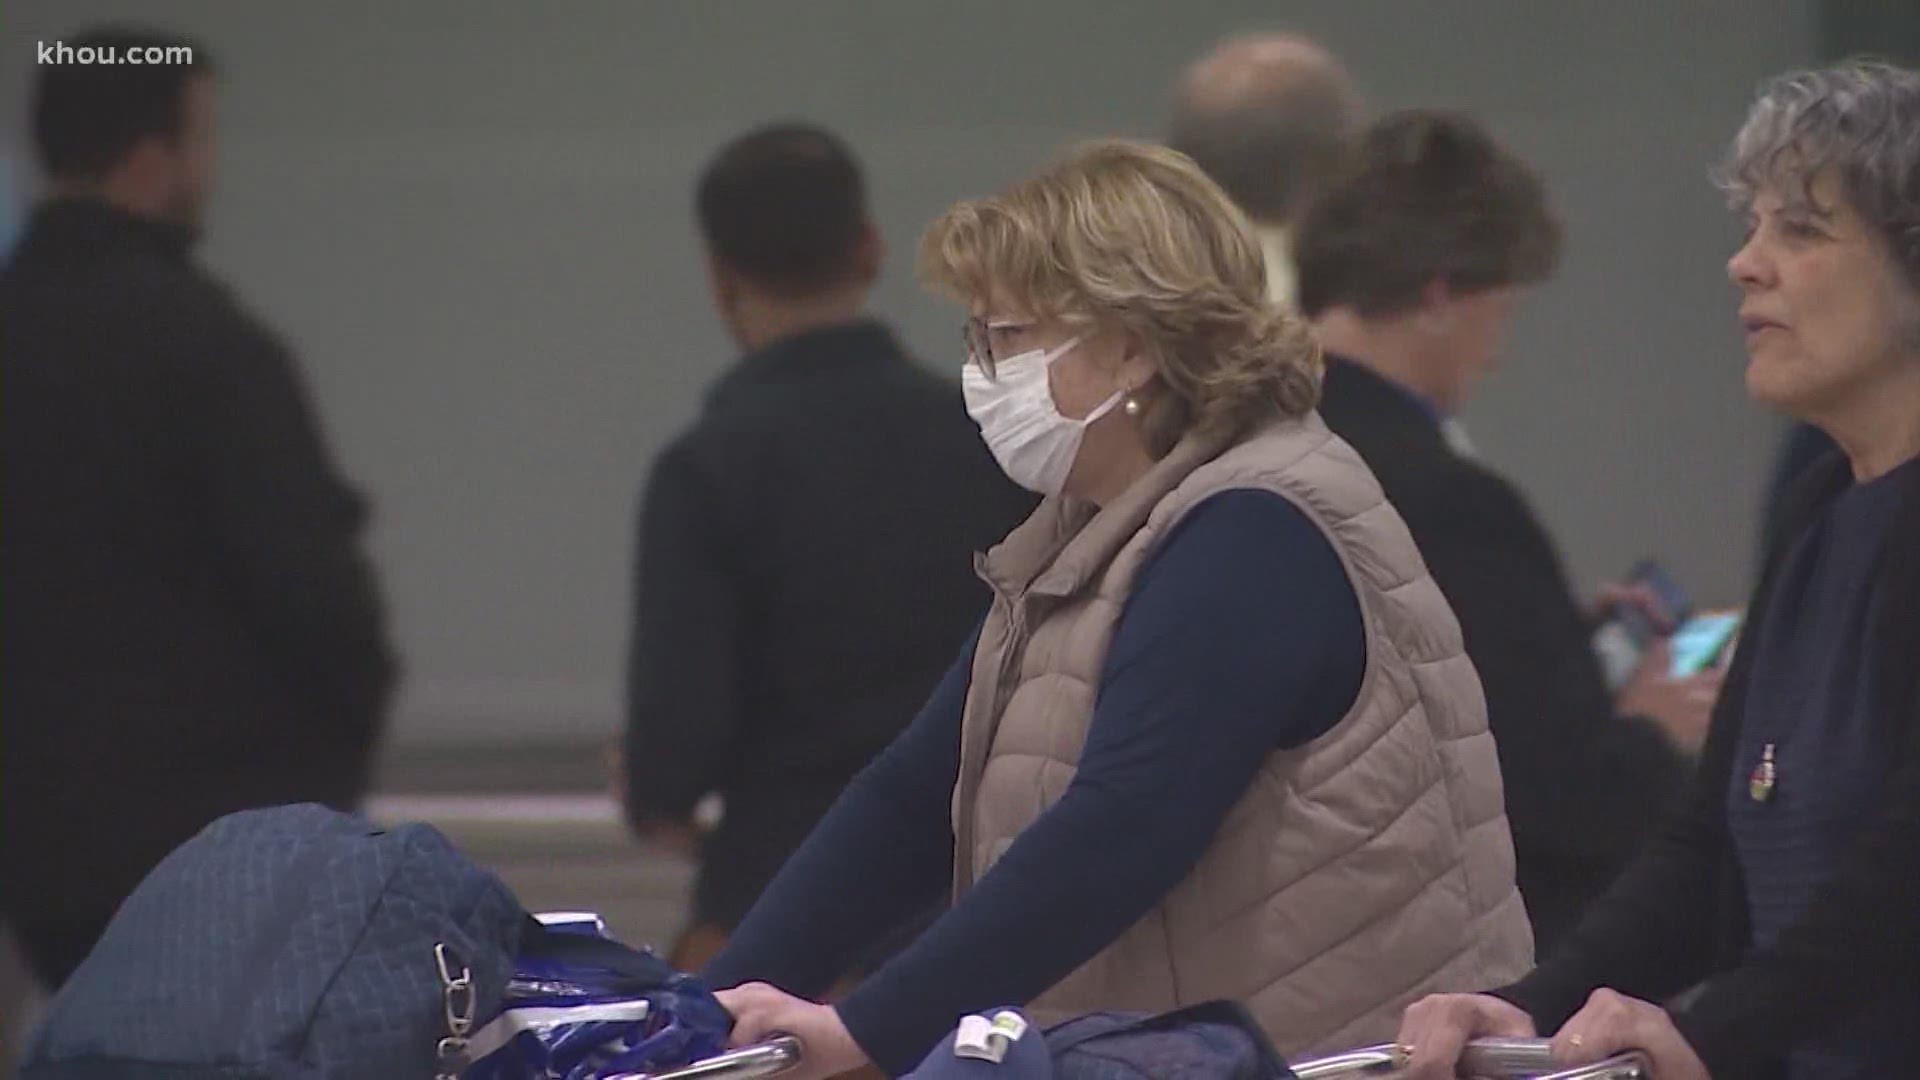 As Texas continues to reopen, UT Physicians asks people to keep up COVID-19 safety practices like wearing a masks when traveling or going out.